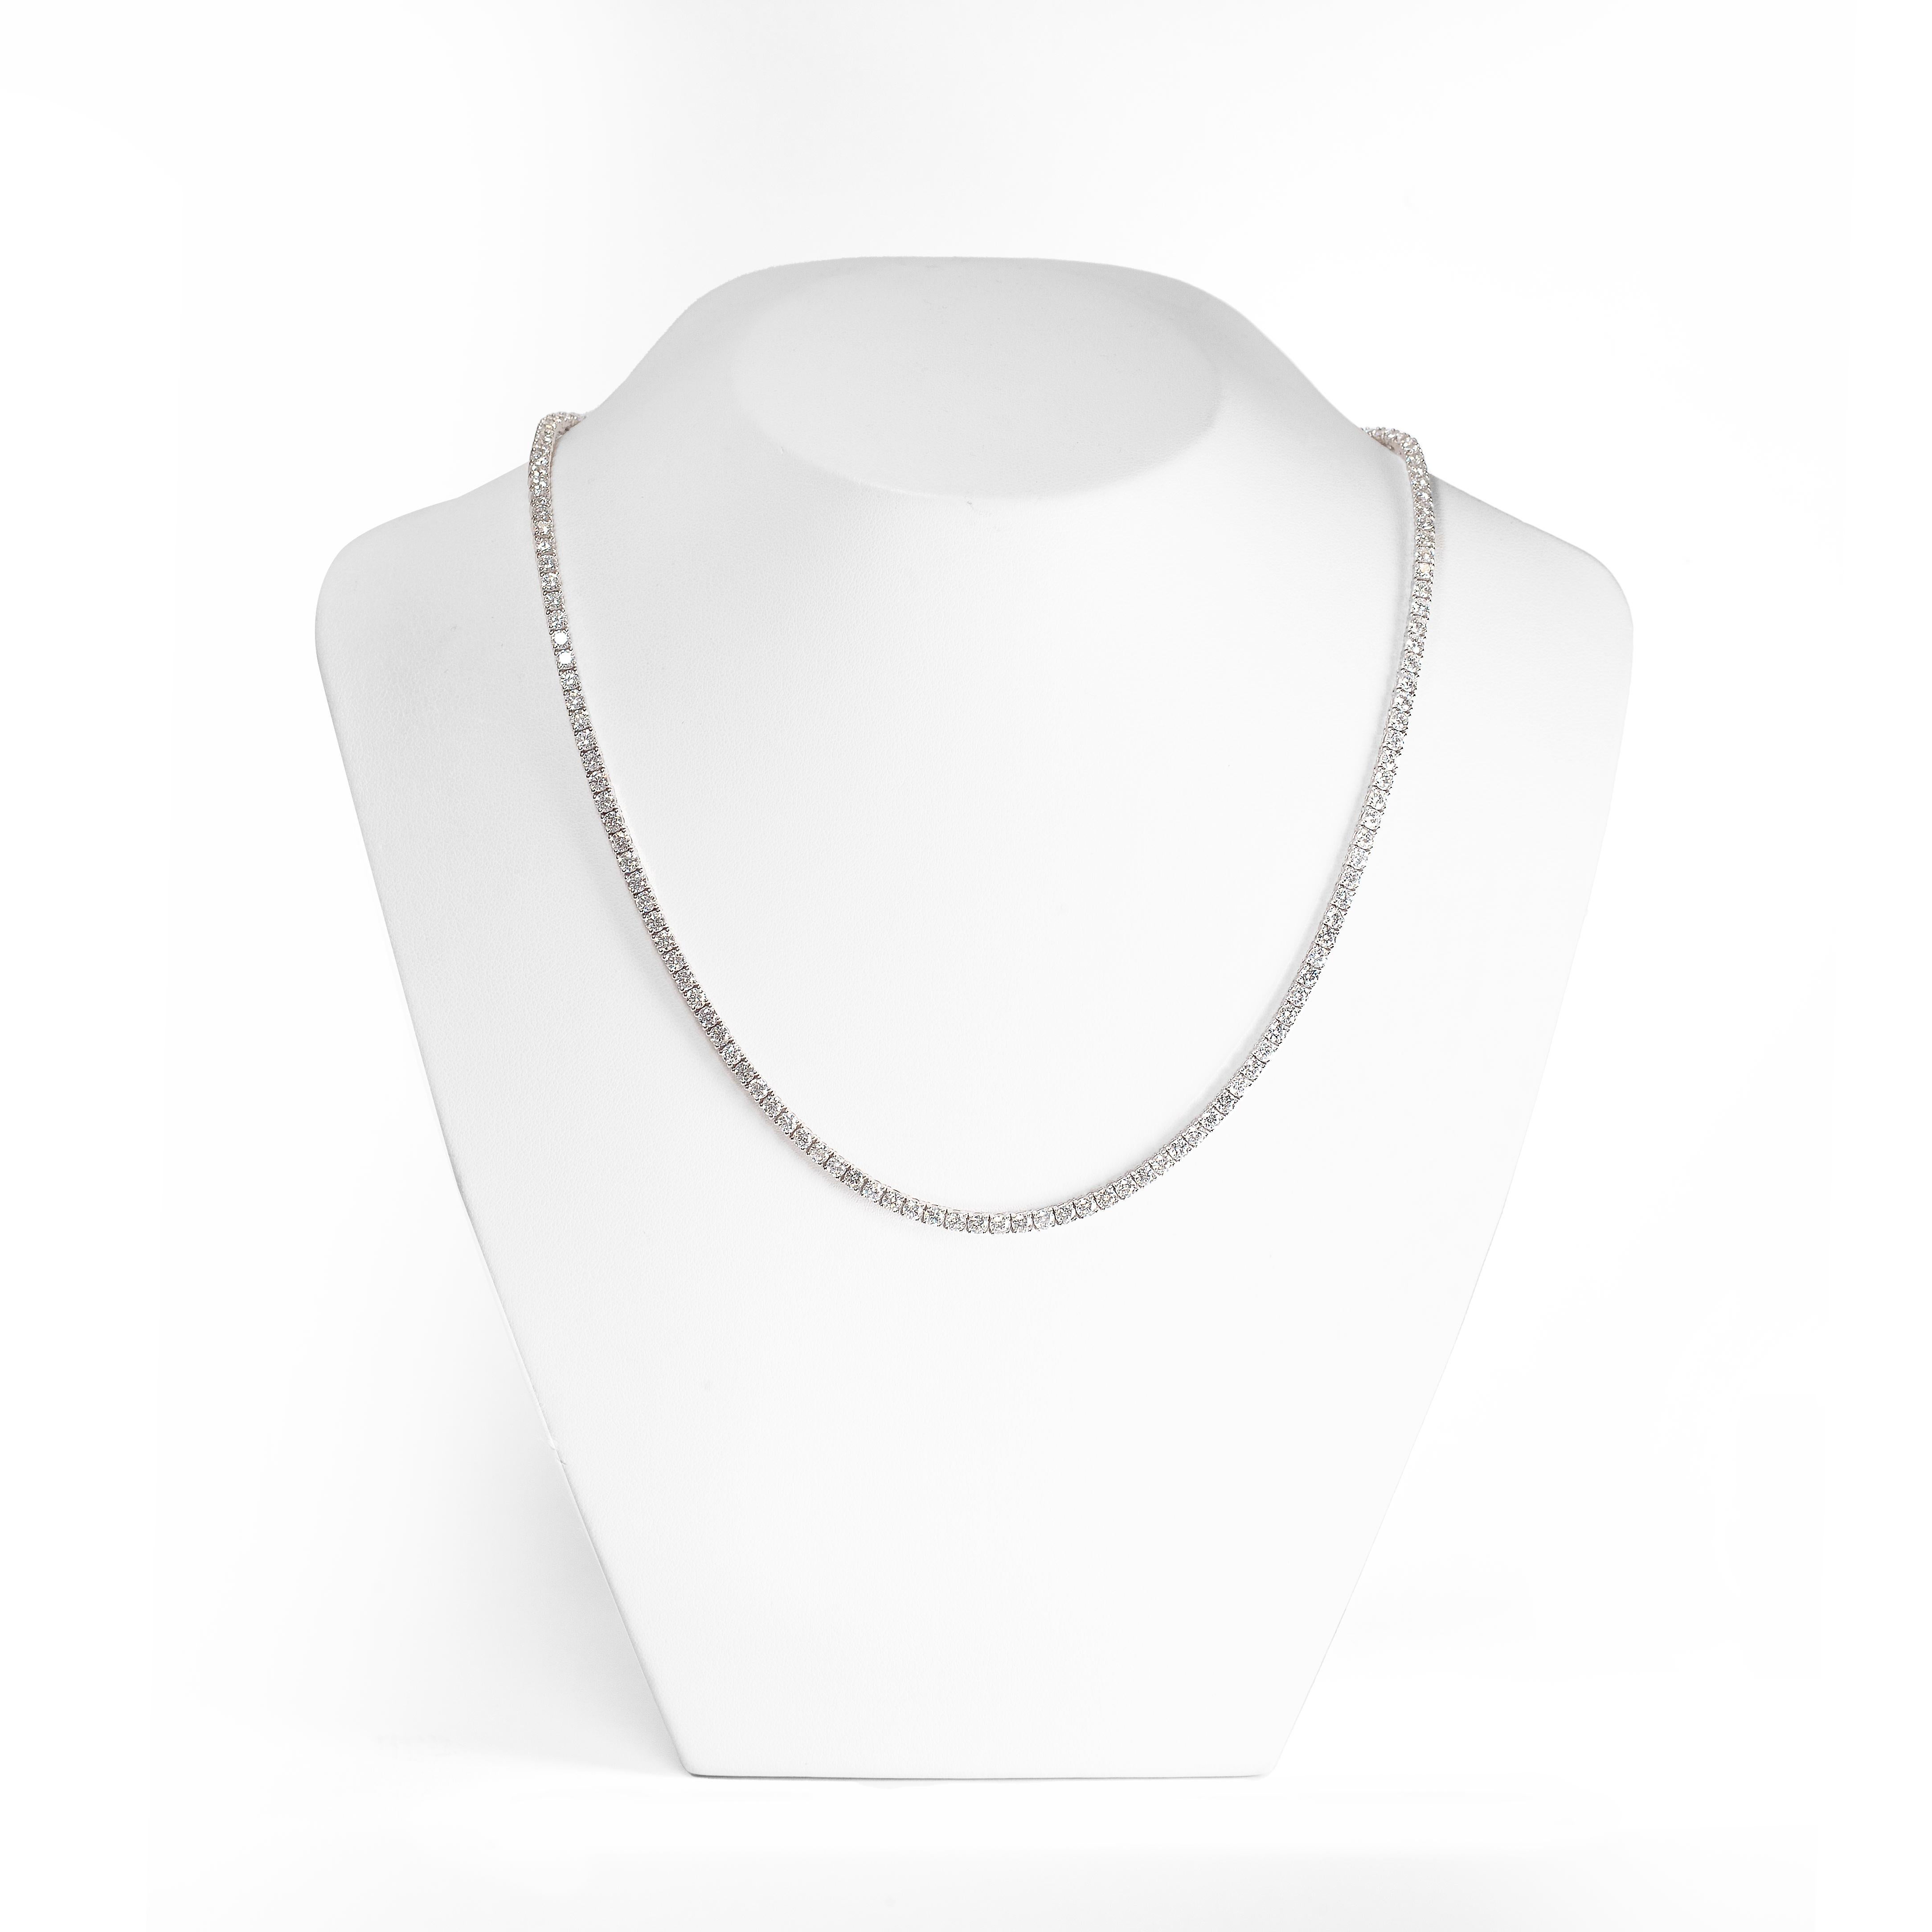 Experience the allure of exquisiteness with this wonderful tennis necklace, expertly crafted in 14 carat white gold. 

This timeless piece features 154 round brilliant cut diamonds, all matched in size perfectly to create a seamless line of striking